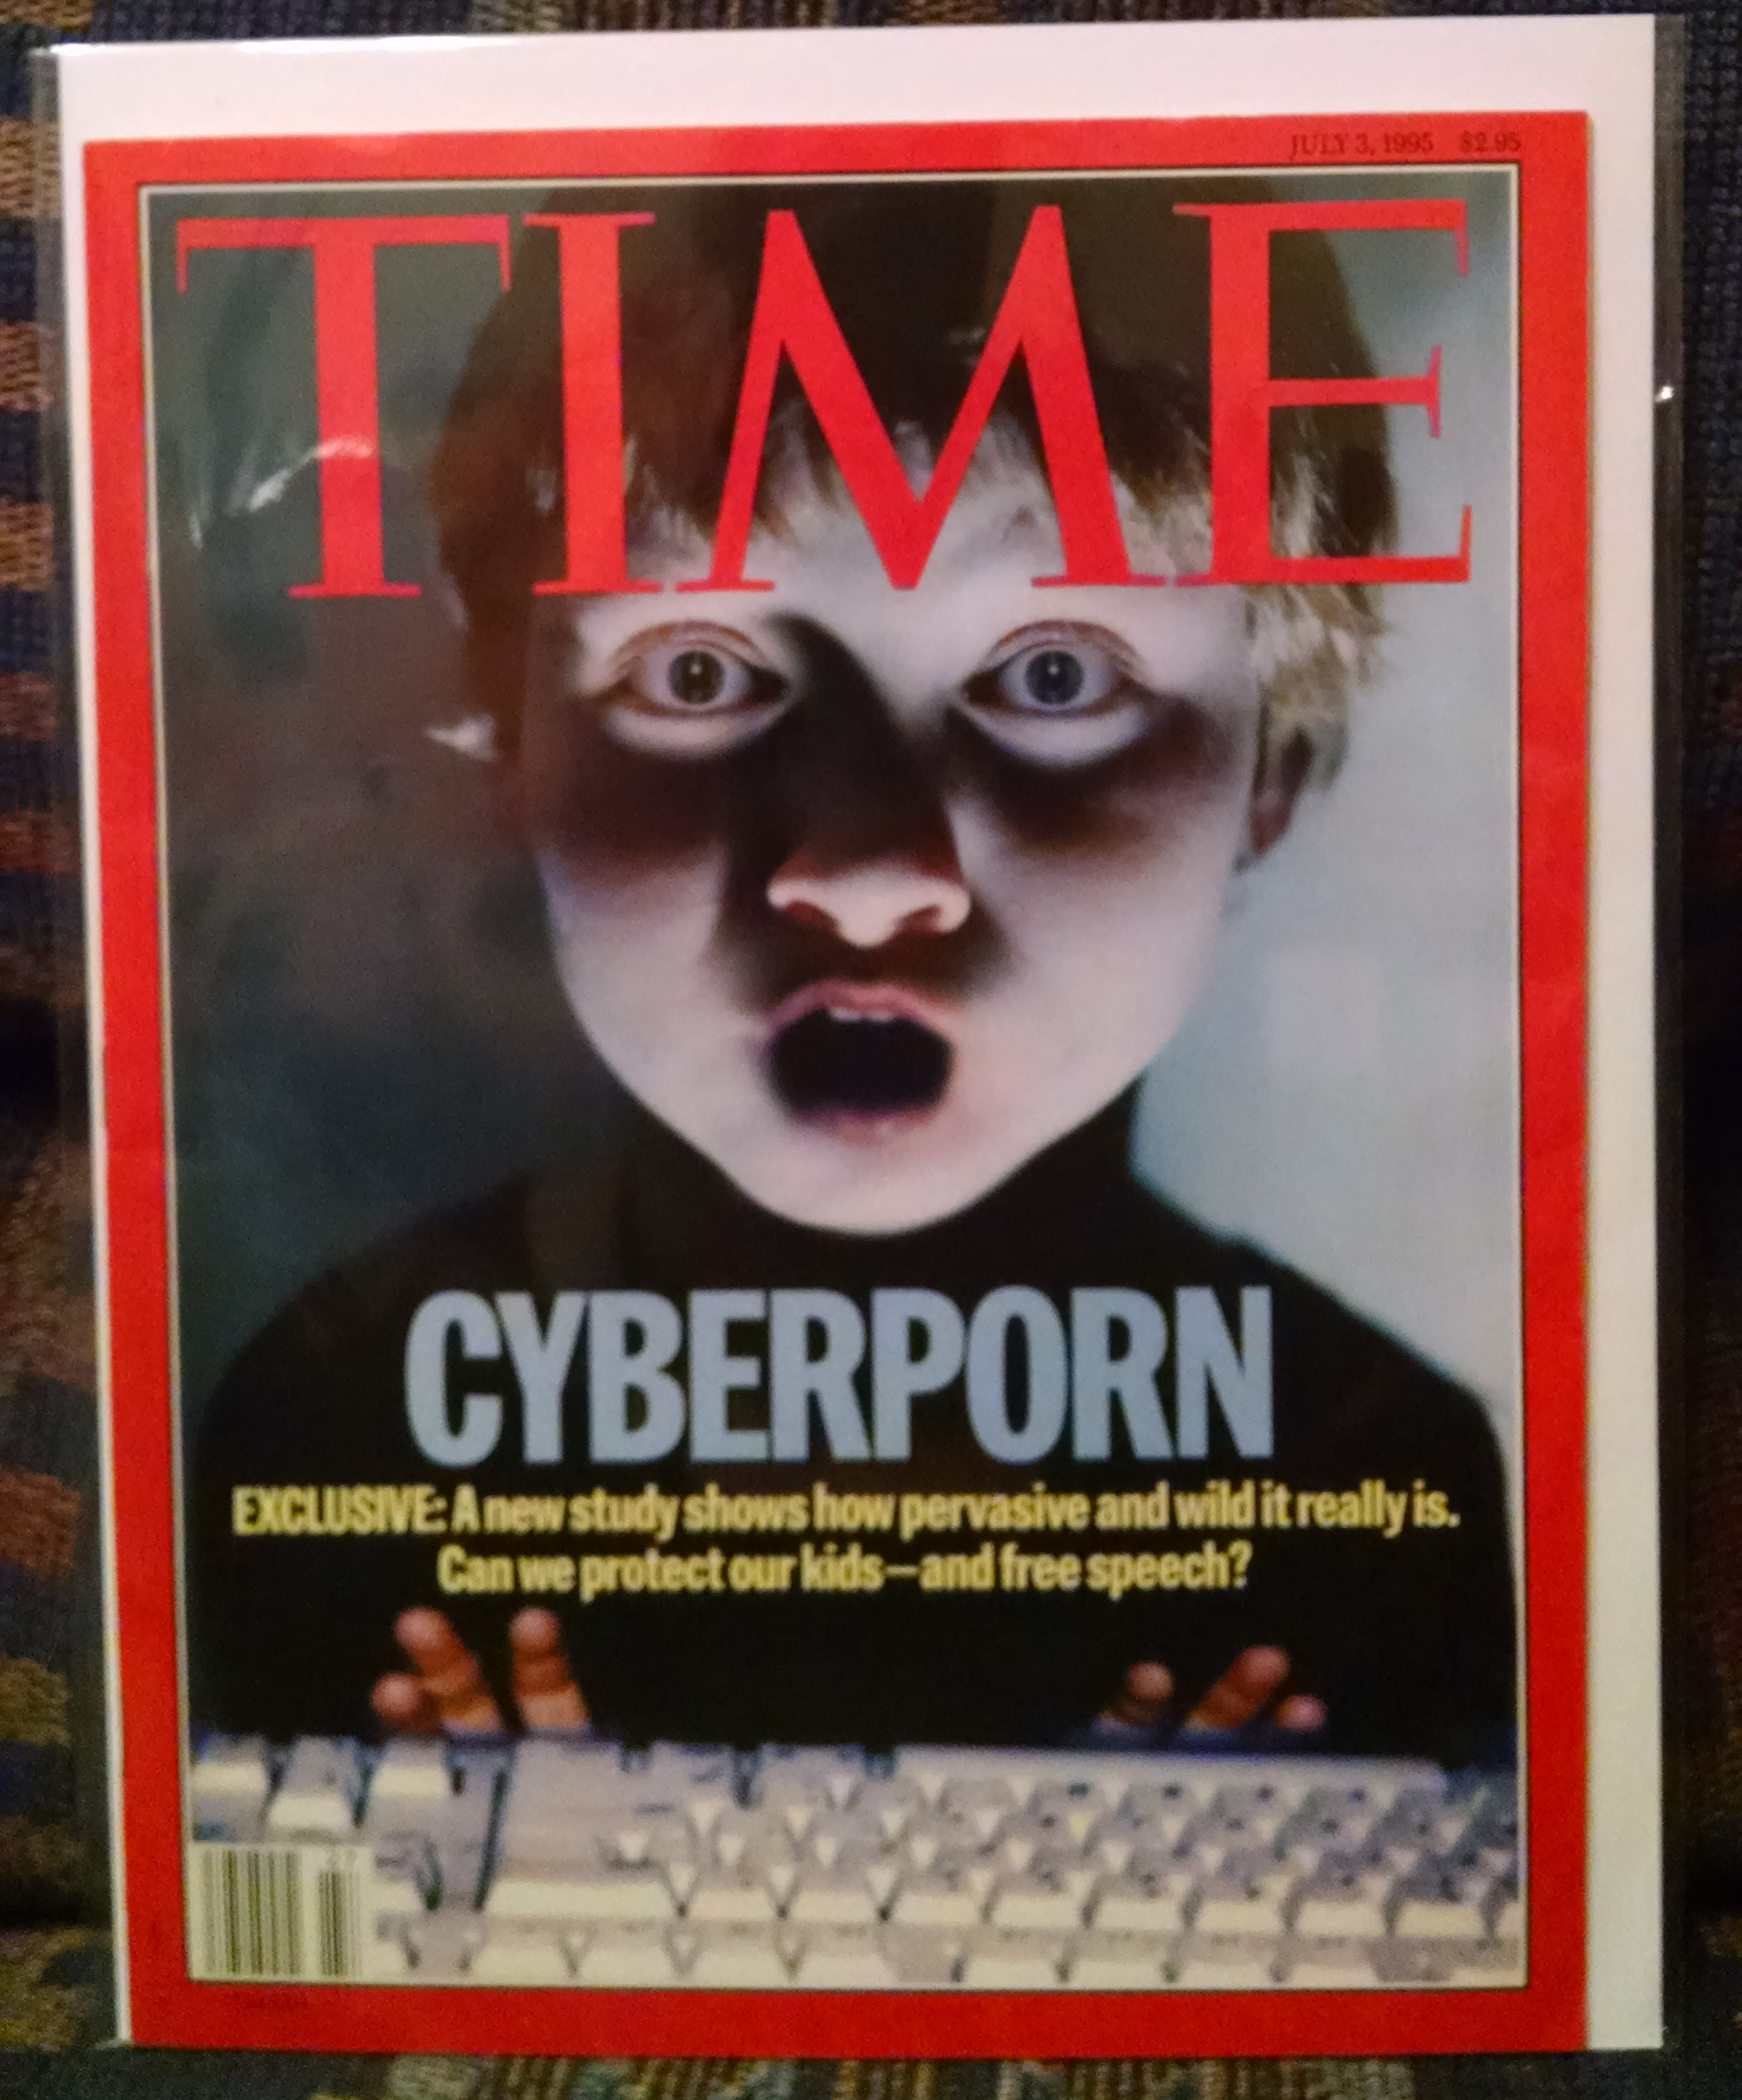 Do you remember that cyberporn article in Time Magazine?